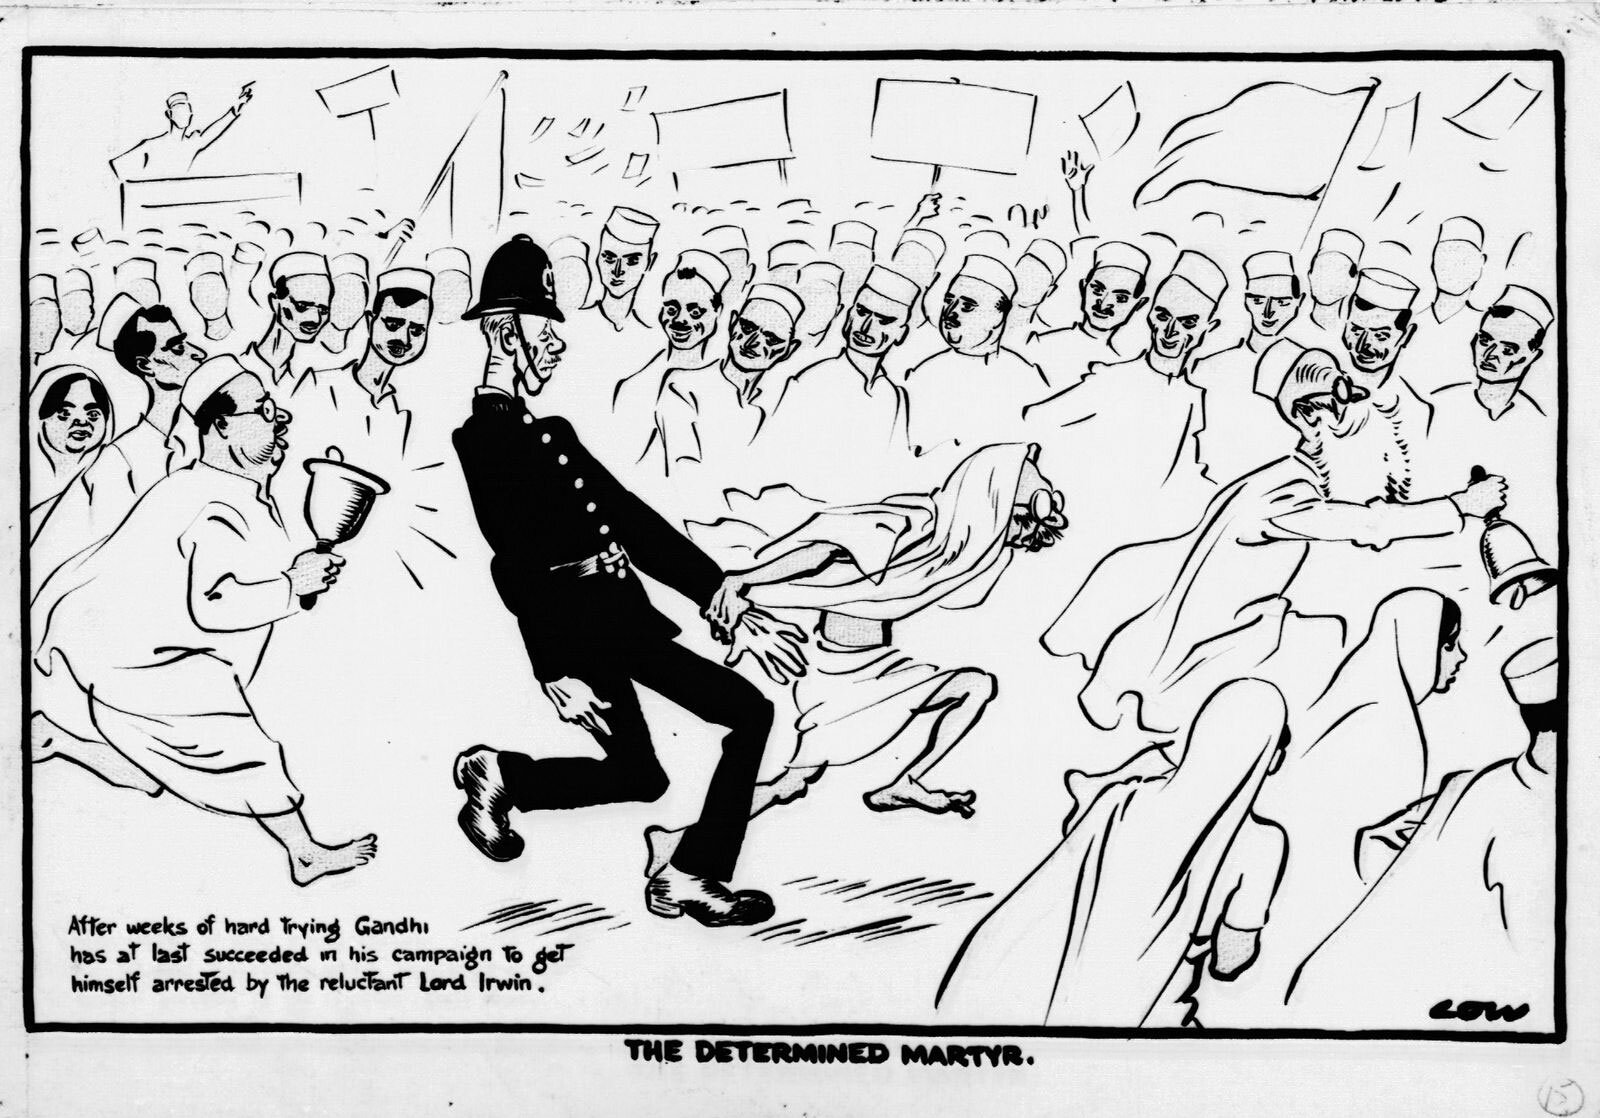 Gandhi Salt March 90th Anniversary Exhibition — 'The determined martyr',  Evening Standard, 6 May 1930